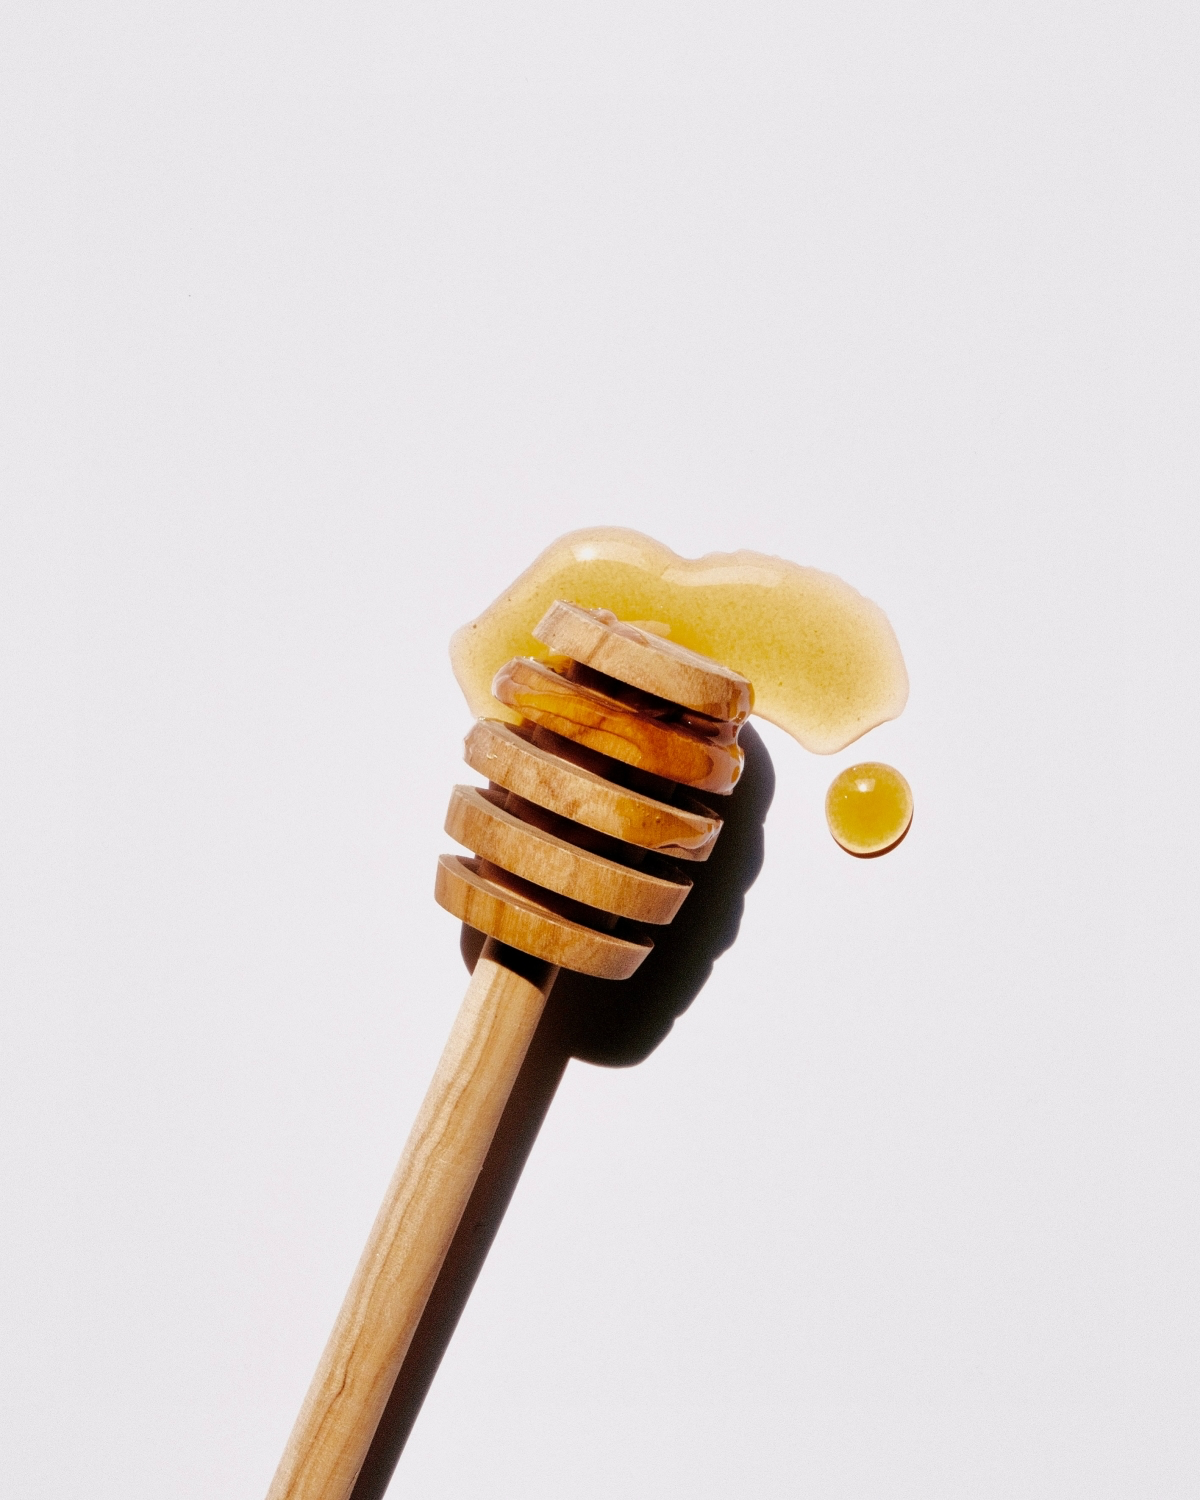 uses for honey other than eating